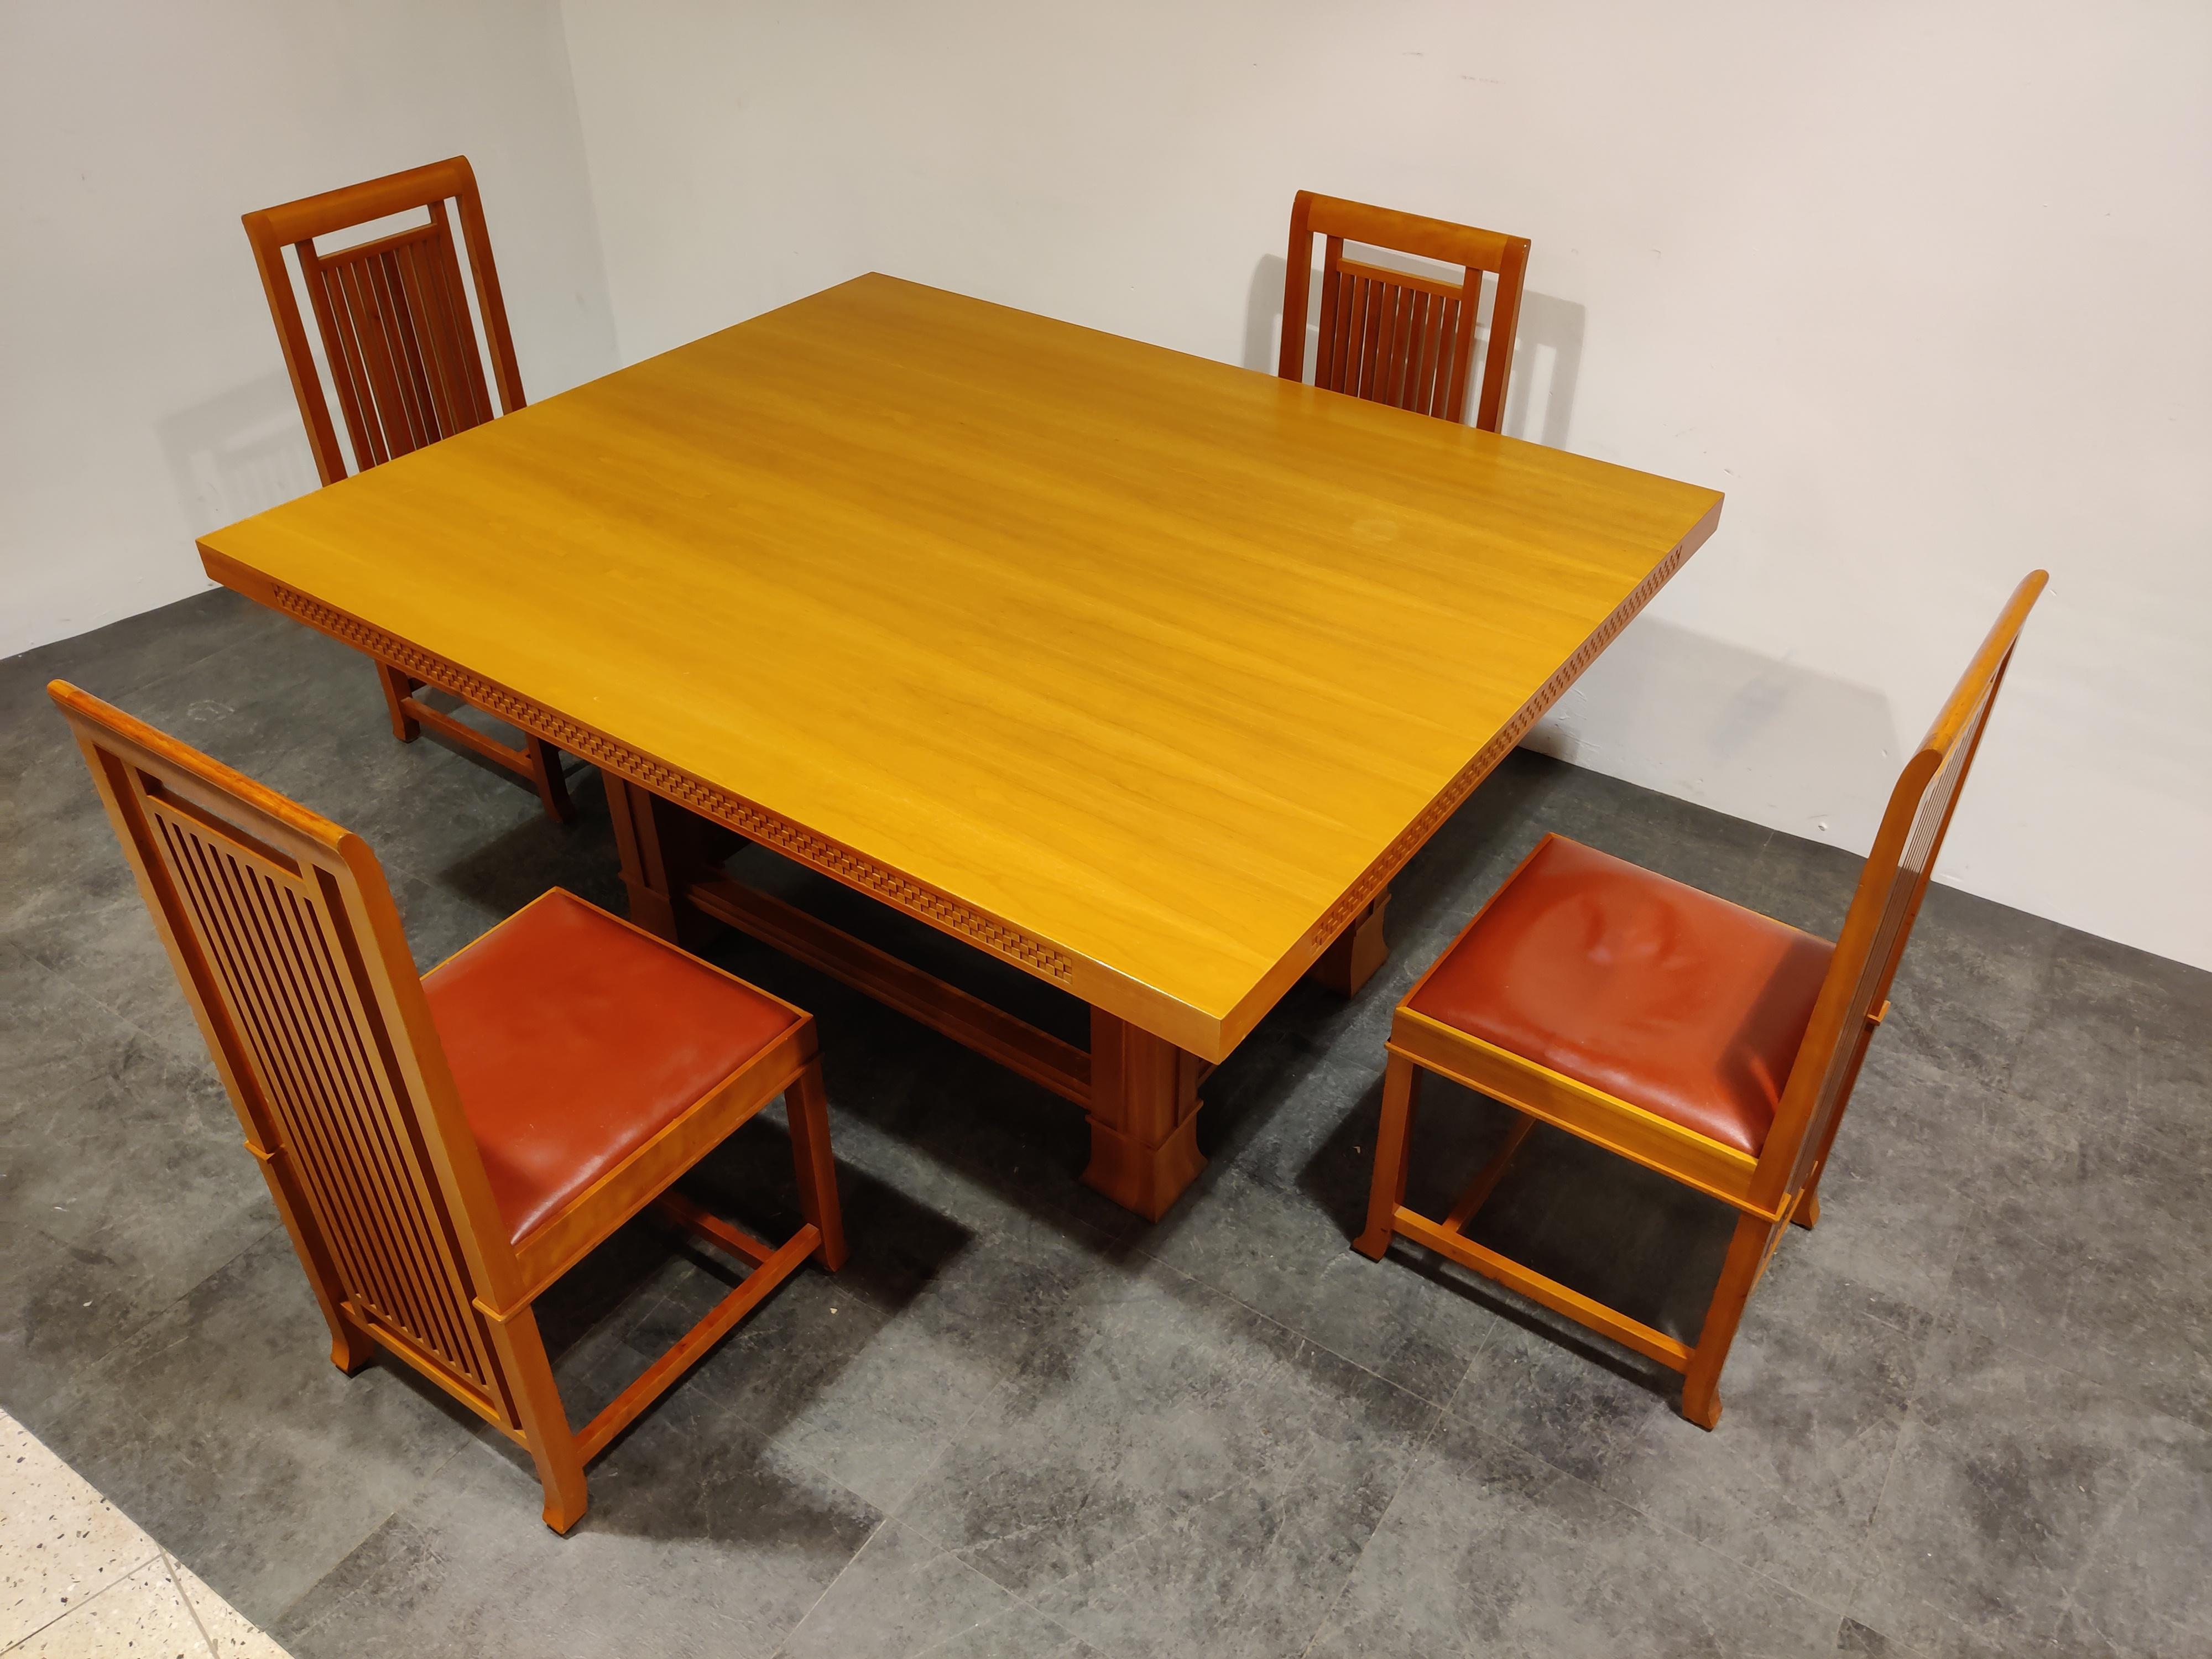 Arts & Crafts design dining table - model Husser - and 4 chairs - model coonley 2' Designed by Frank Lloyd Wright in 1899 for the Joseph W. Husser House (Chicago, Illinois), this table was re-edited by Cassina in 1992 and included in the “Cassina I